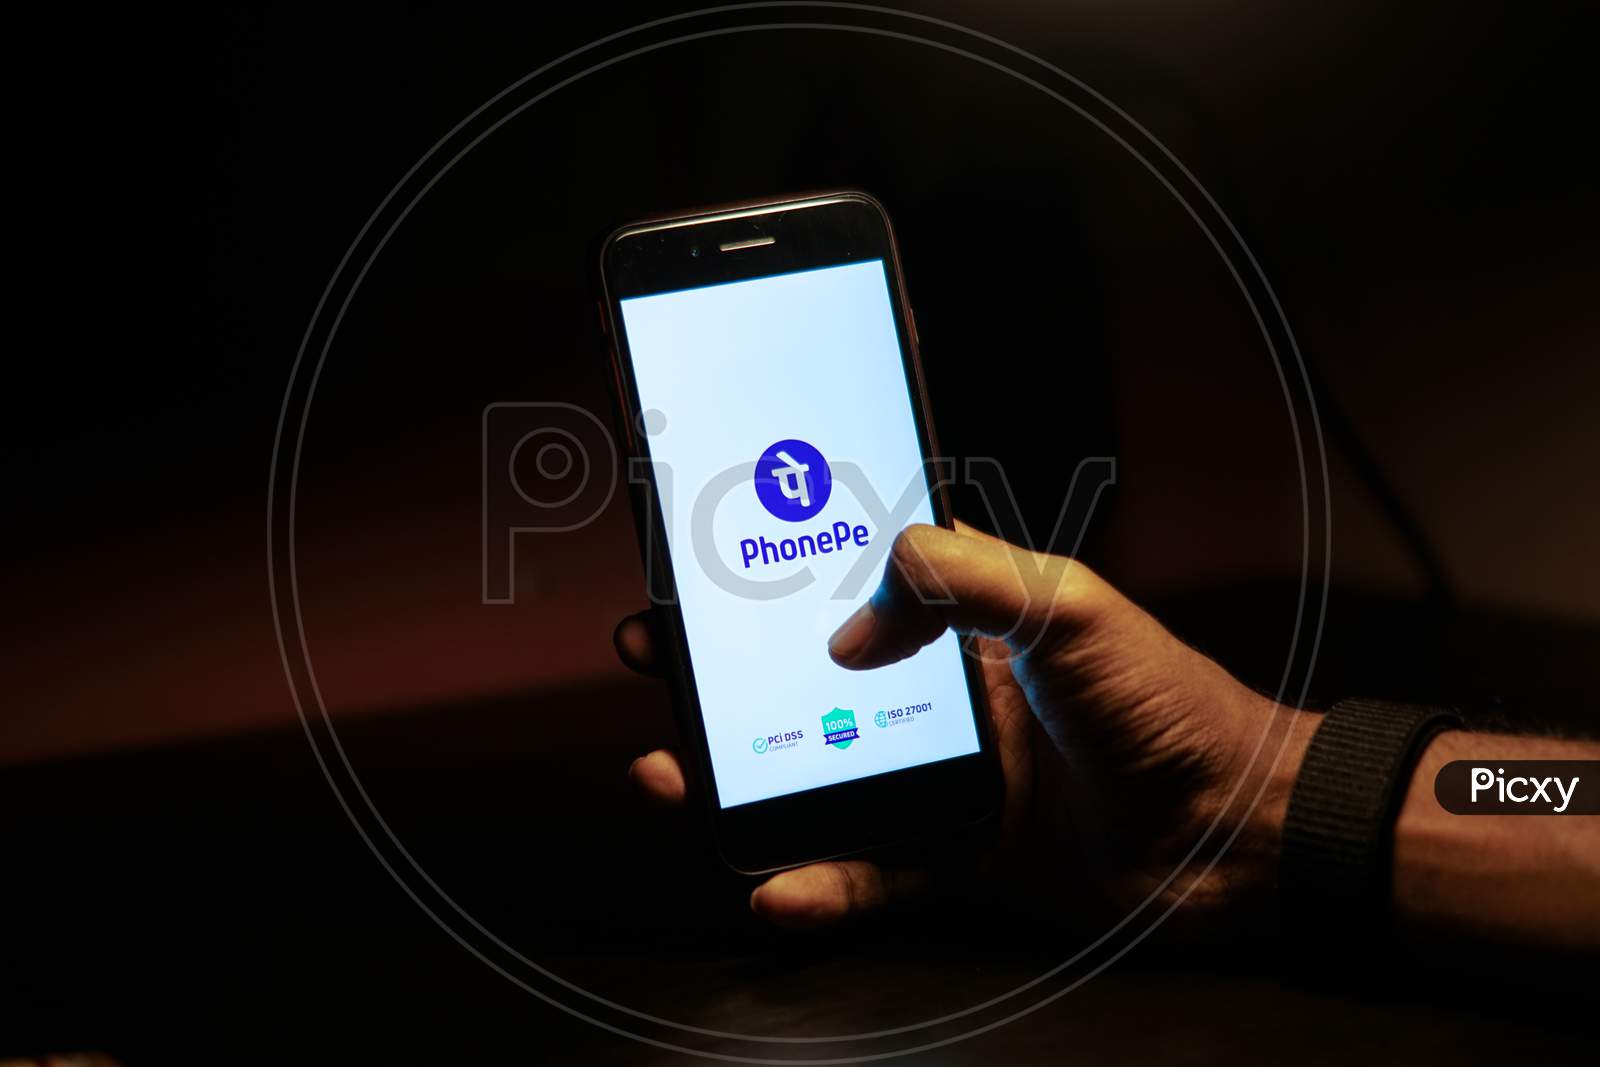 PhonePe Mobile App Icon Opening on Smartphone Screen Closeup With Finger